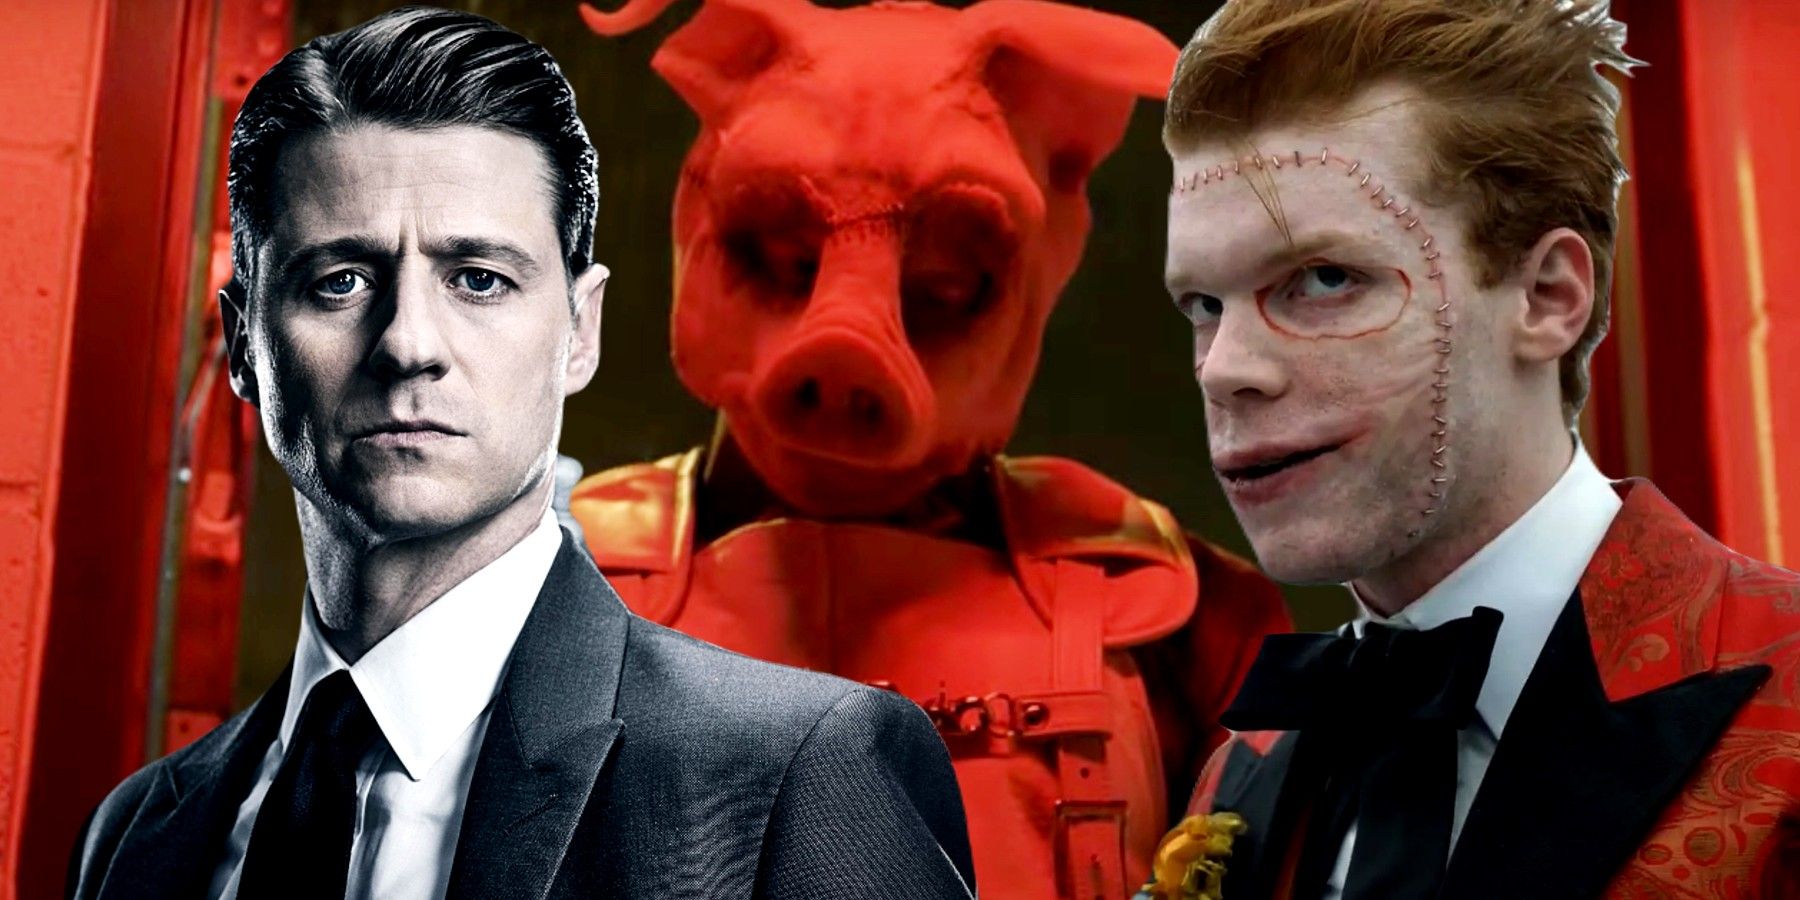 gotham weird stories, blended image with Gotham's Pyg, Jim Gordon and Jerome